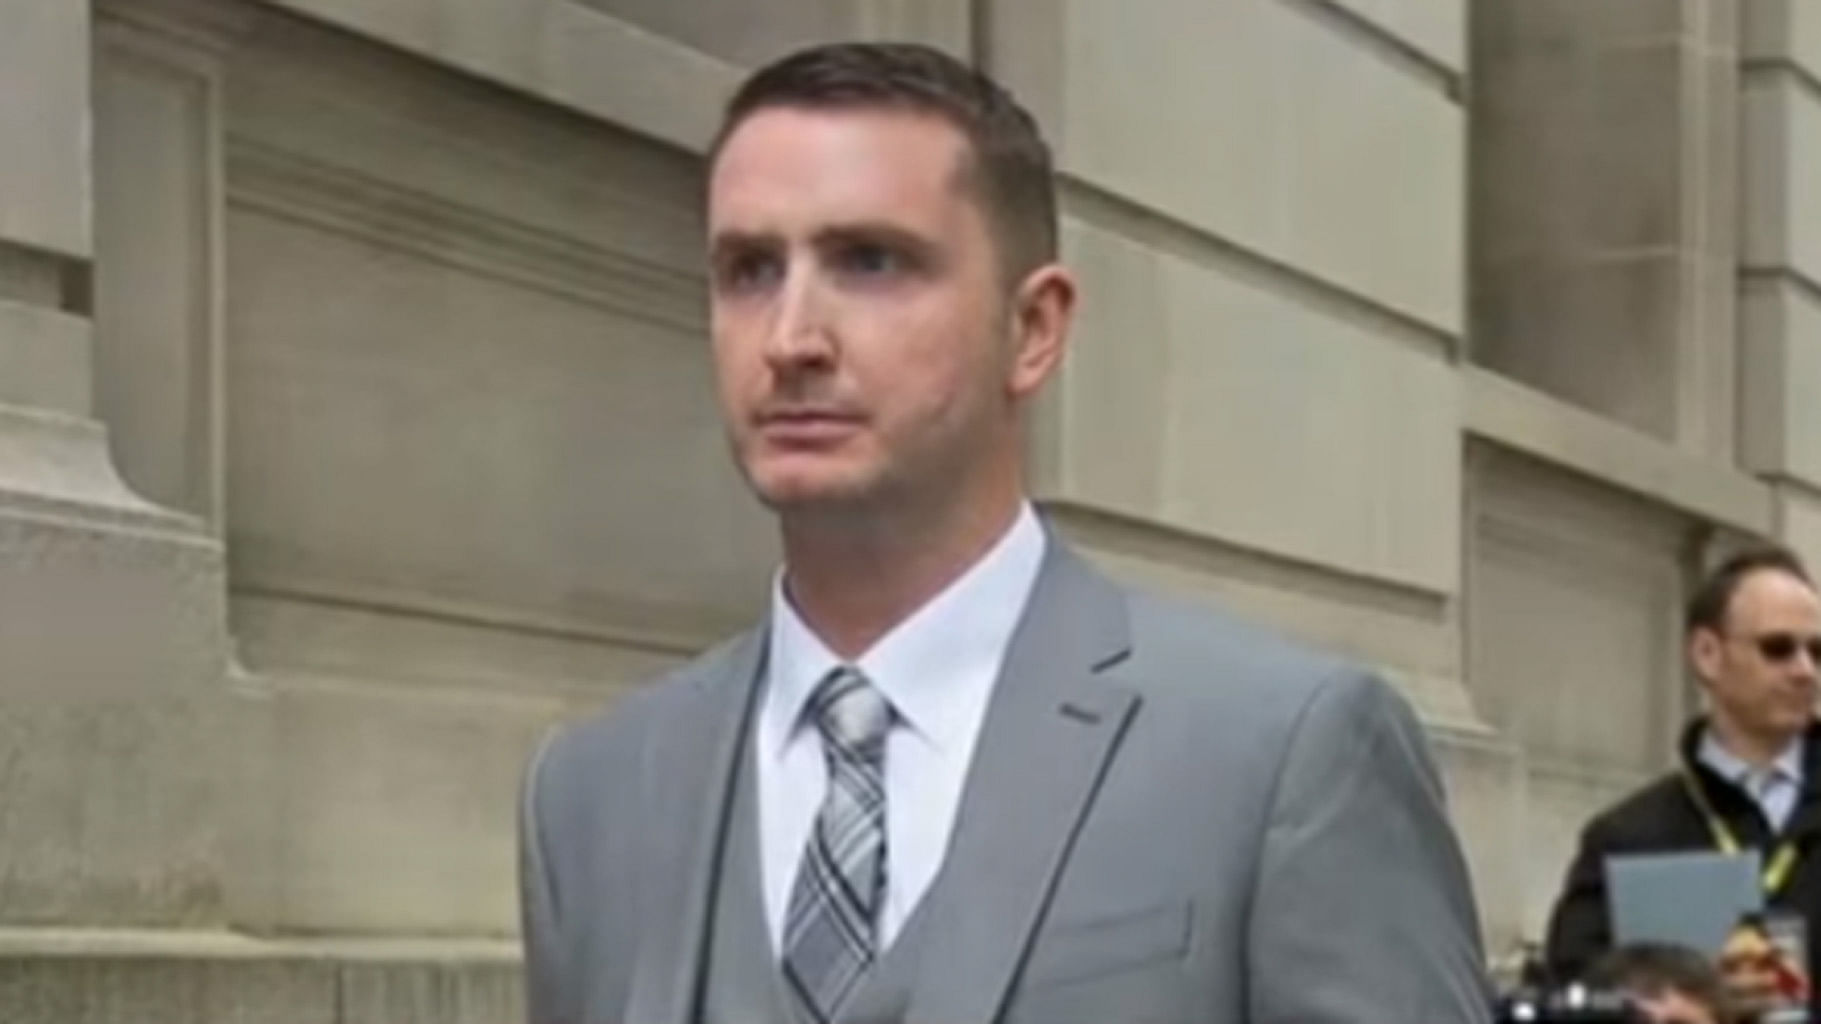 

Photo of Officer Edward Nero, who has been acquitted in the Freddie Gray custody case. (Photo Courtesy: YouTube Screengrab)